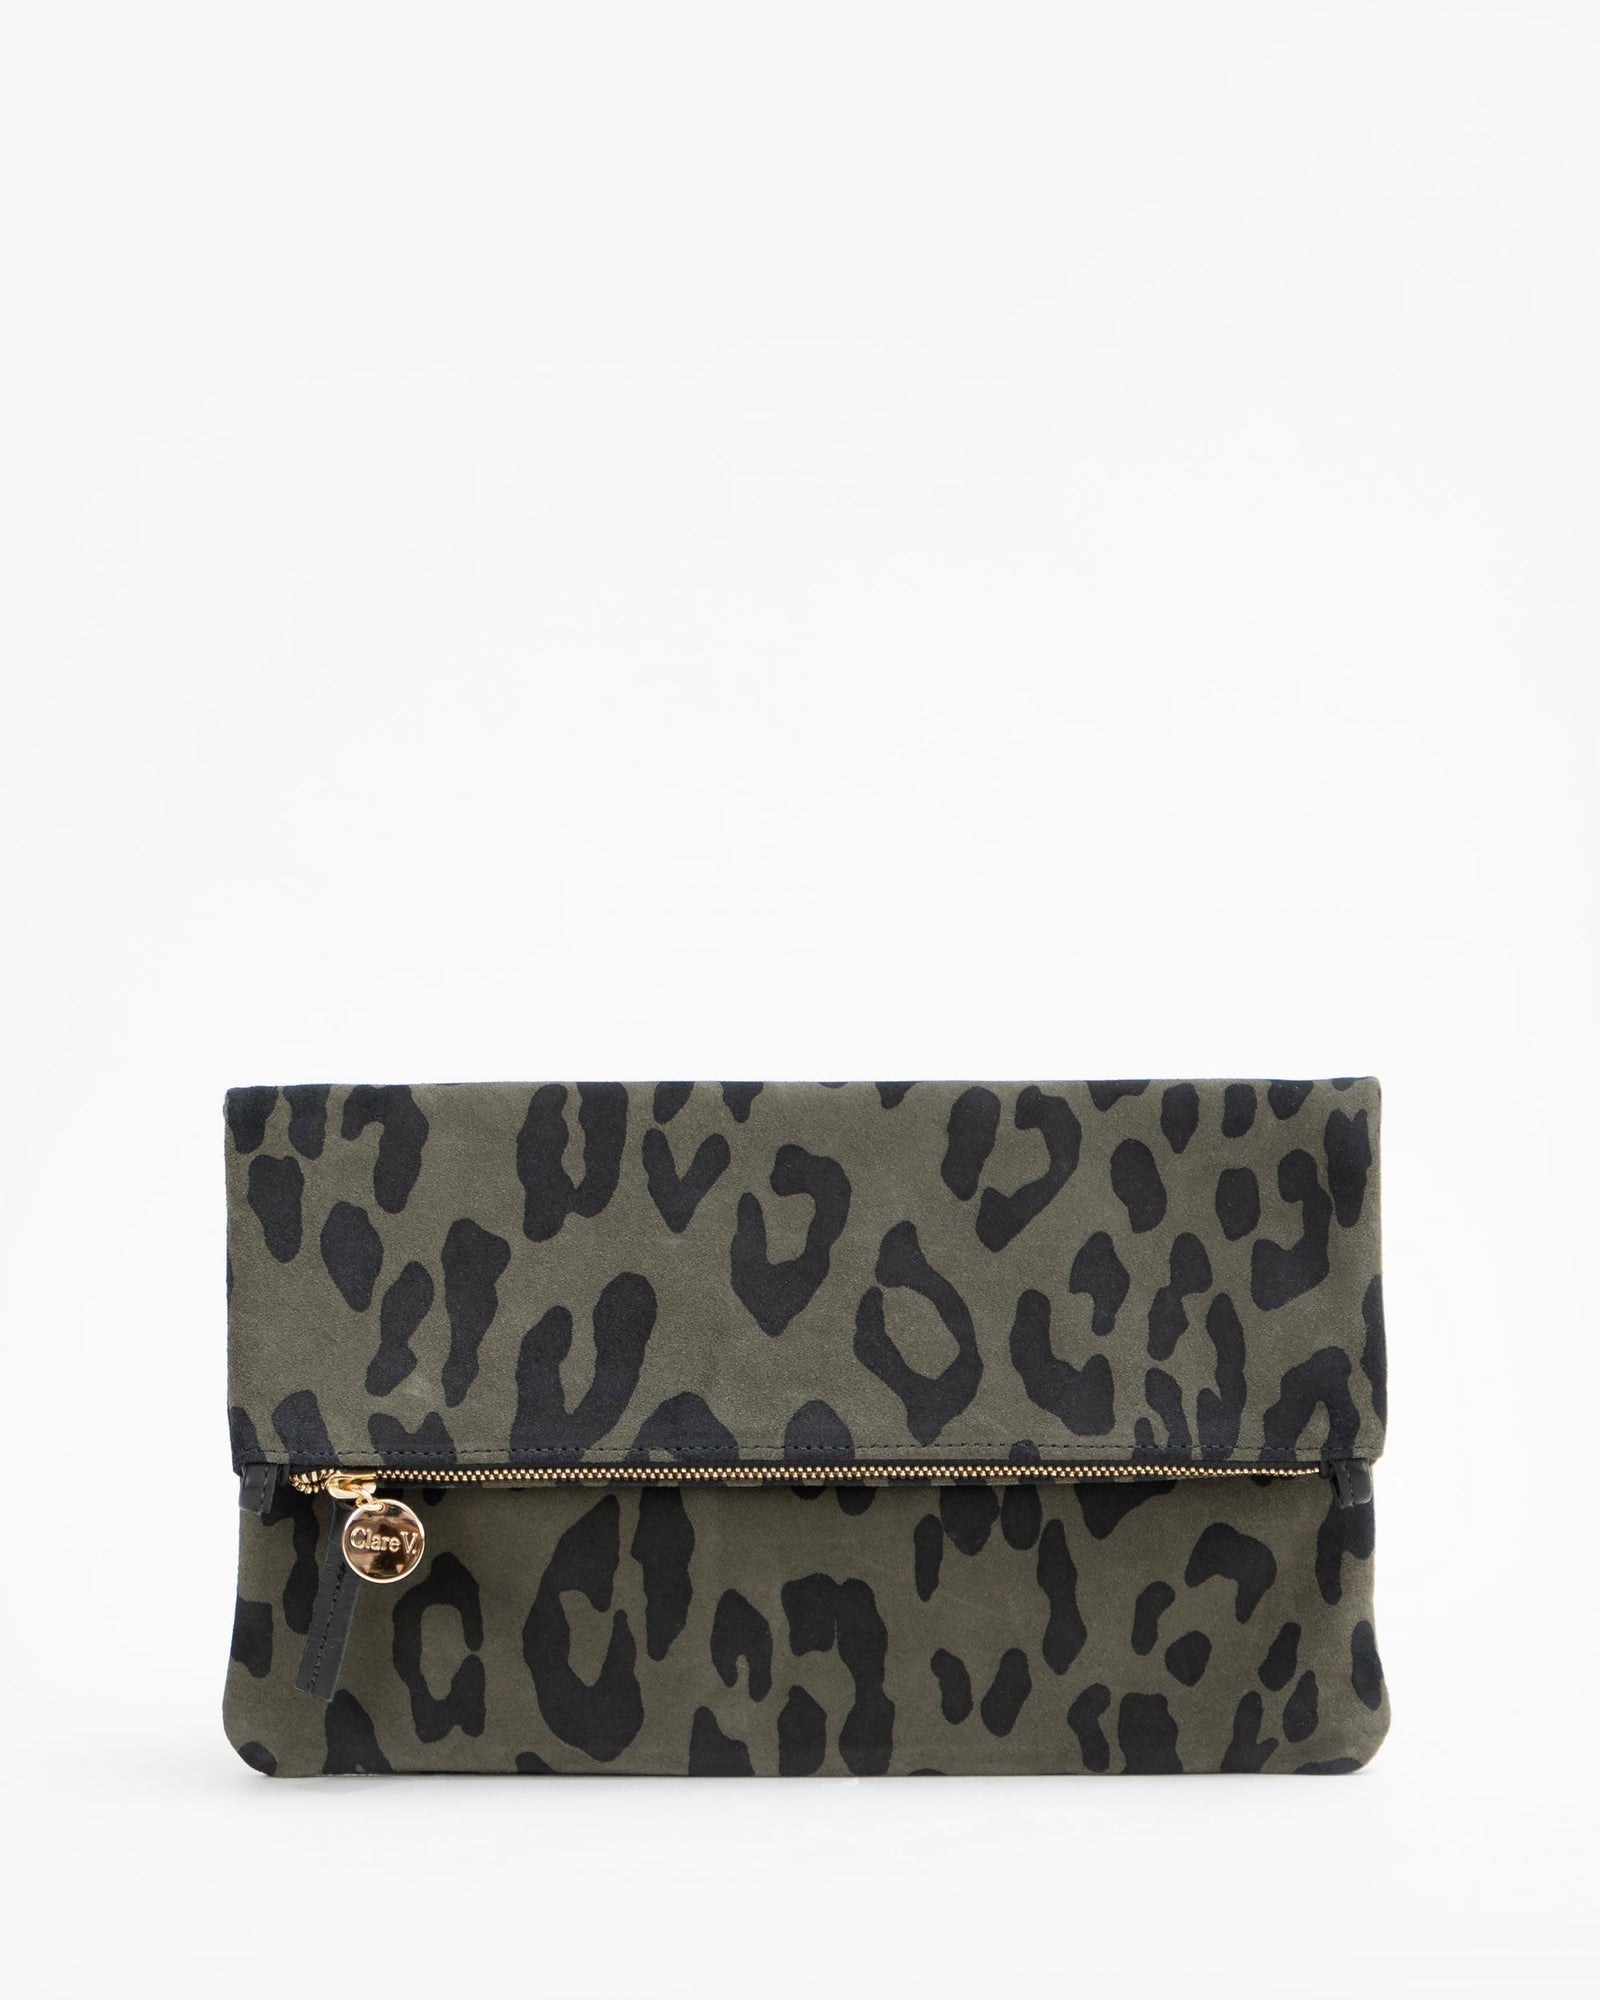 Army Pablo Cat Suede Foldover Clutch with Tabs - Front